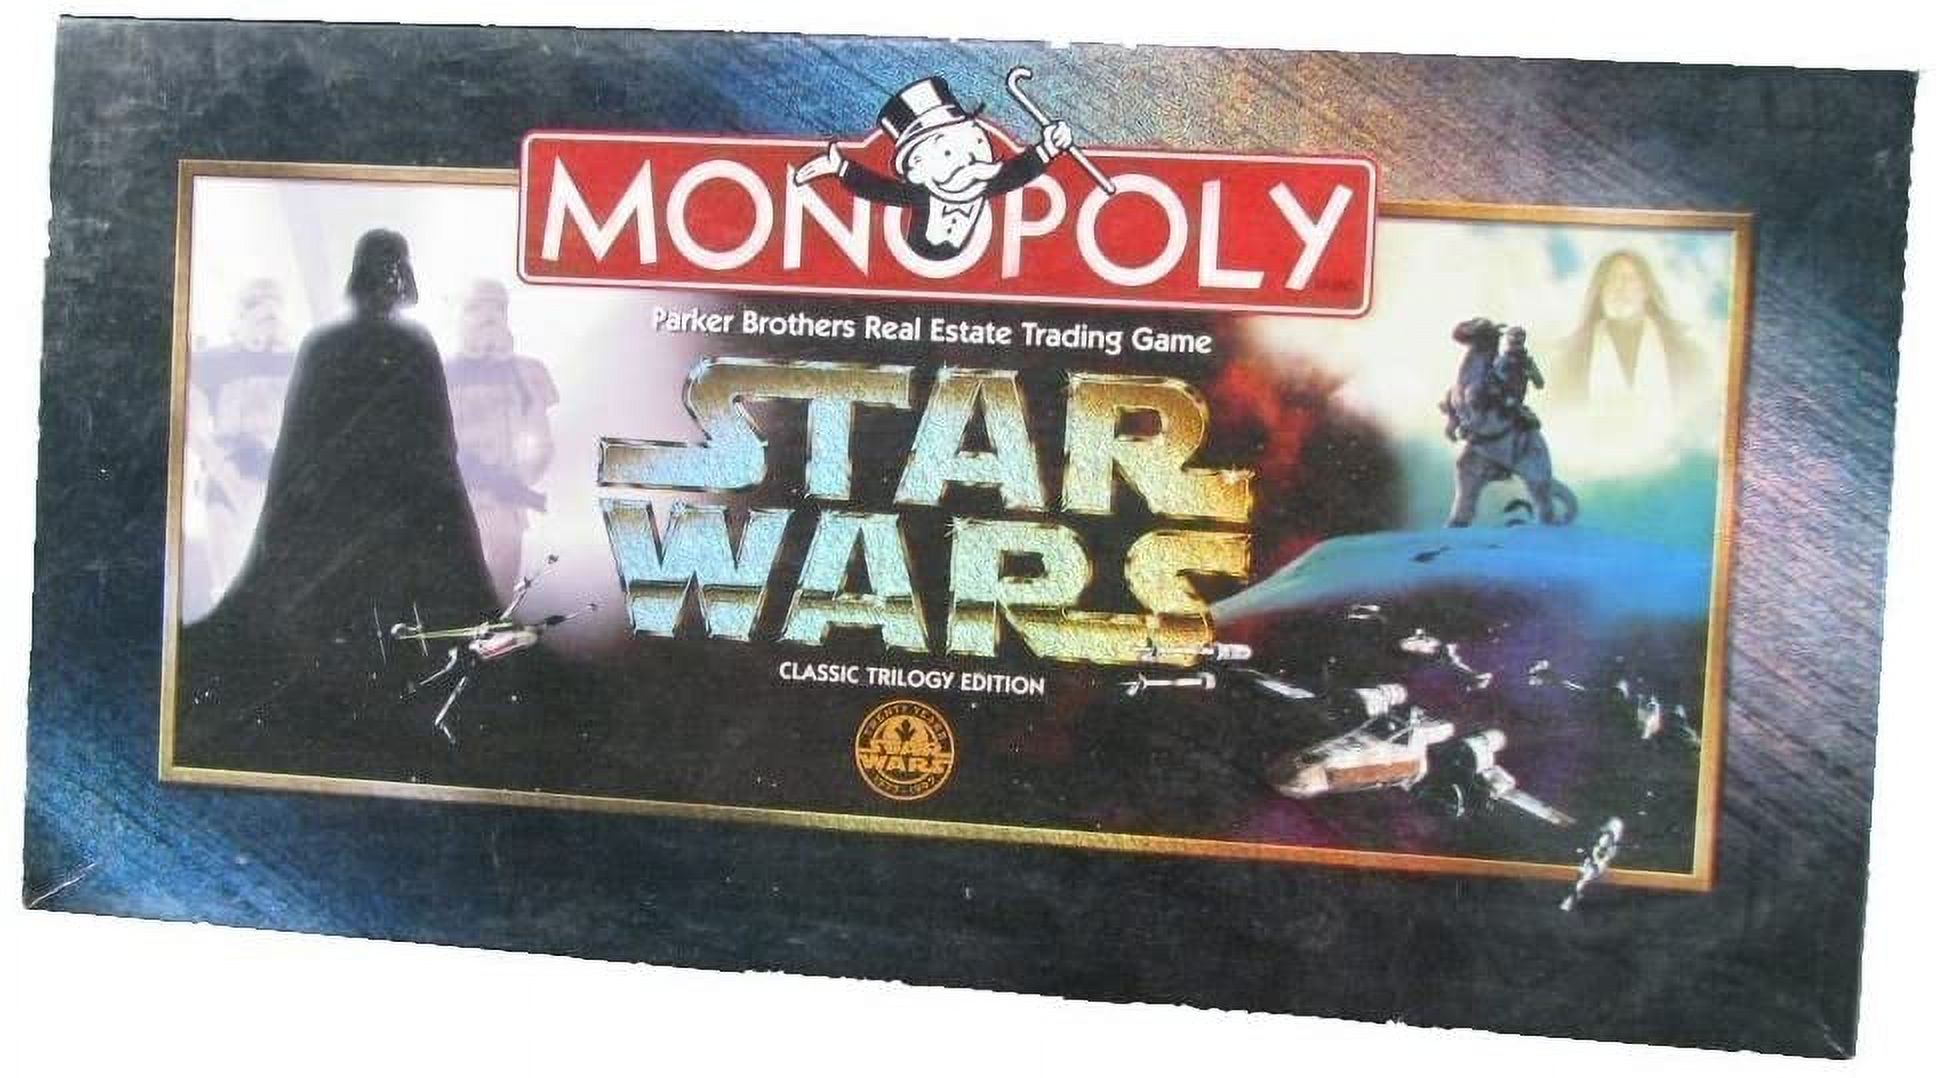 Star Wars Monopoly - Classic Trilogy Edition VG/EX - image 1 of 2